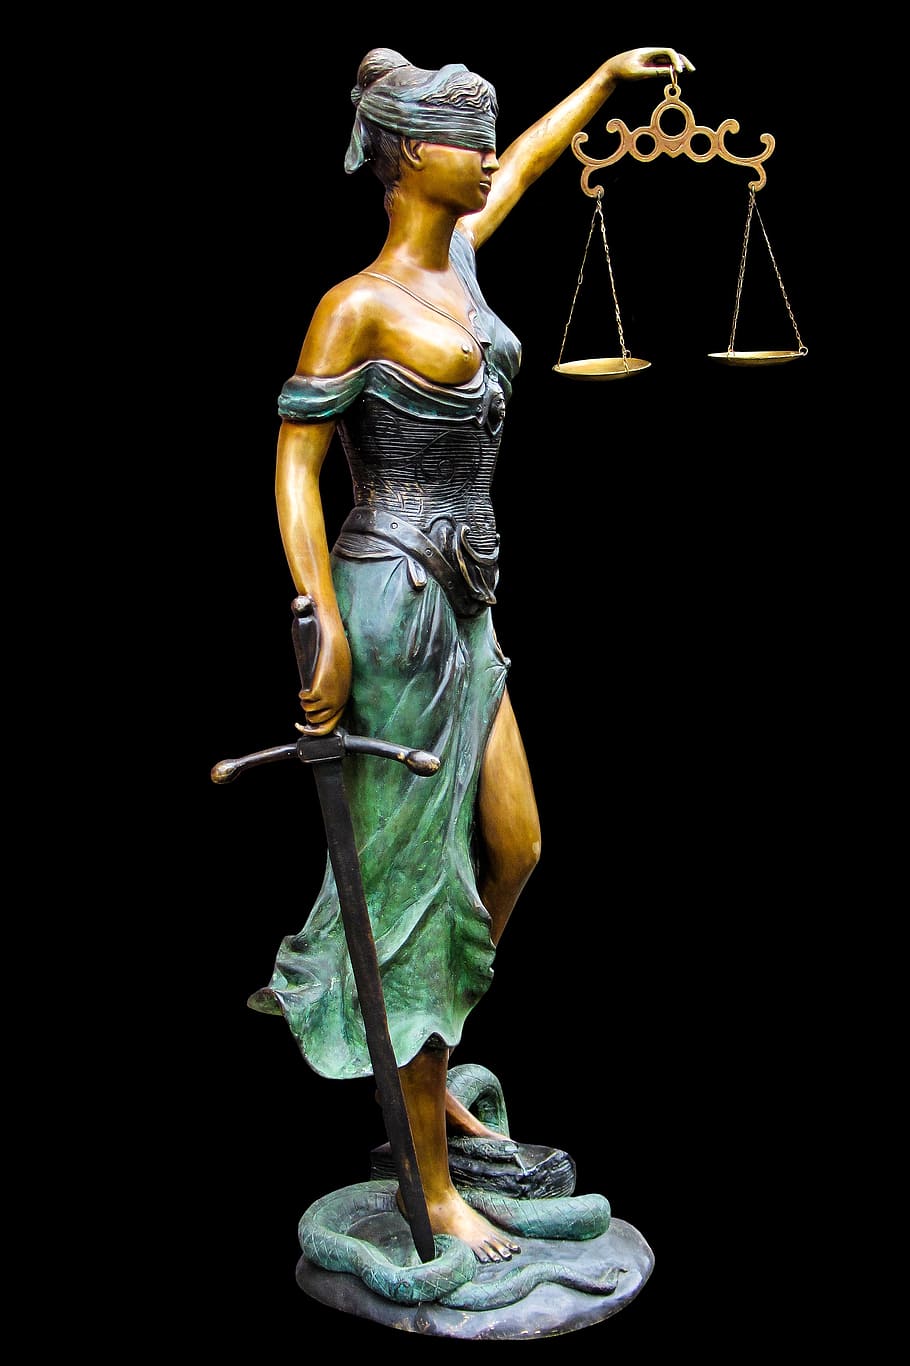 HD Wallpaper Lady Justice Paragraph Attorney Judge Process